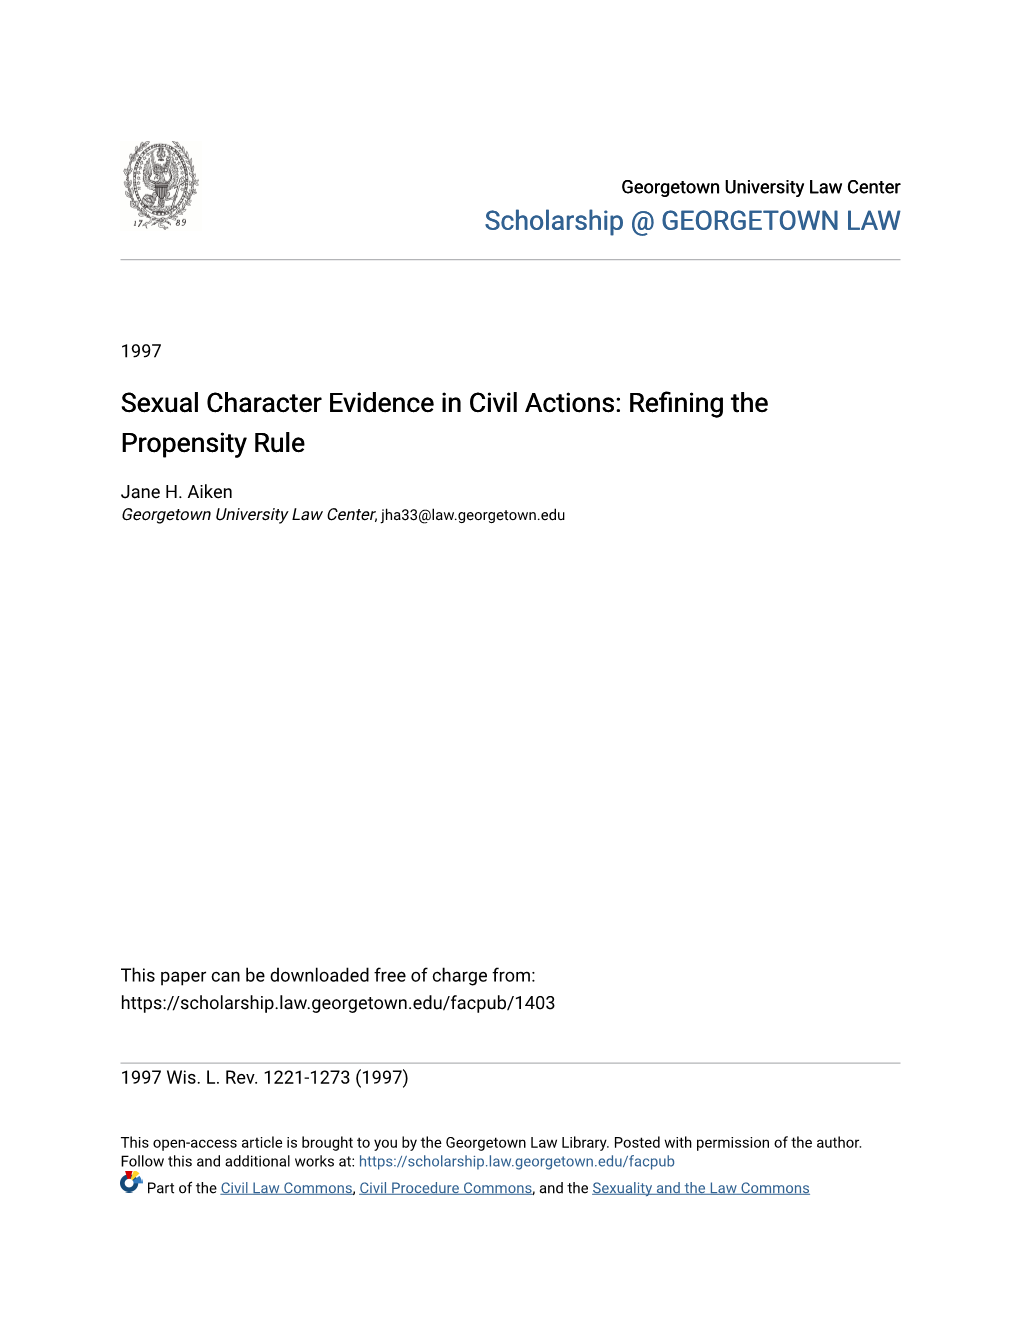 Sexual Character Evidence in Civil Actions: Refining the Propensity Rule